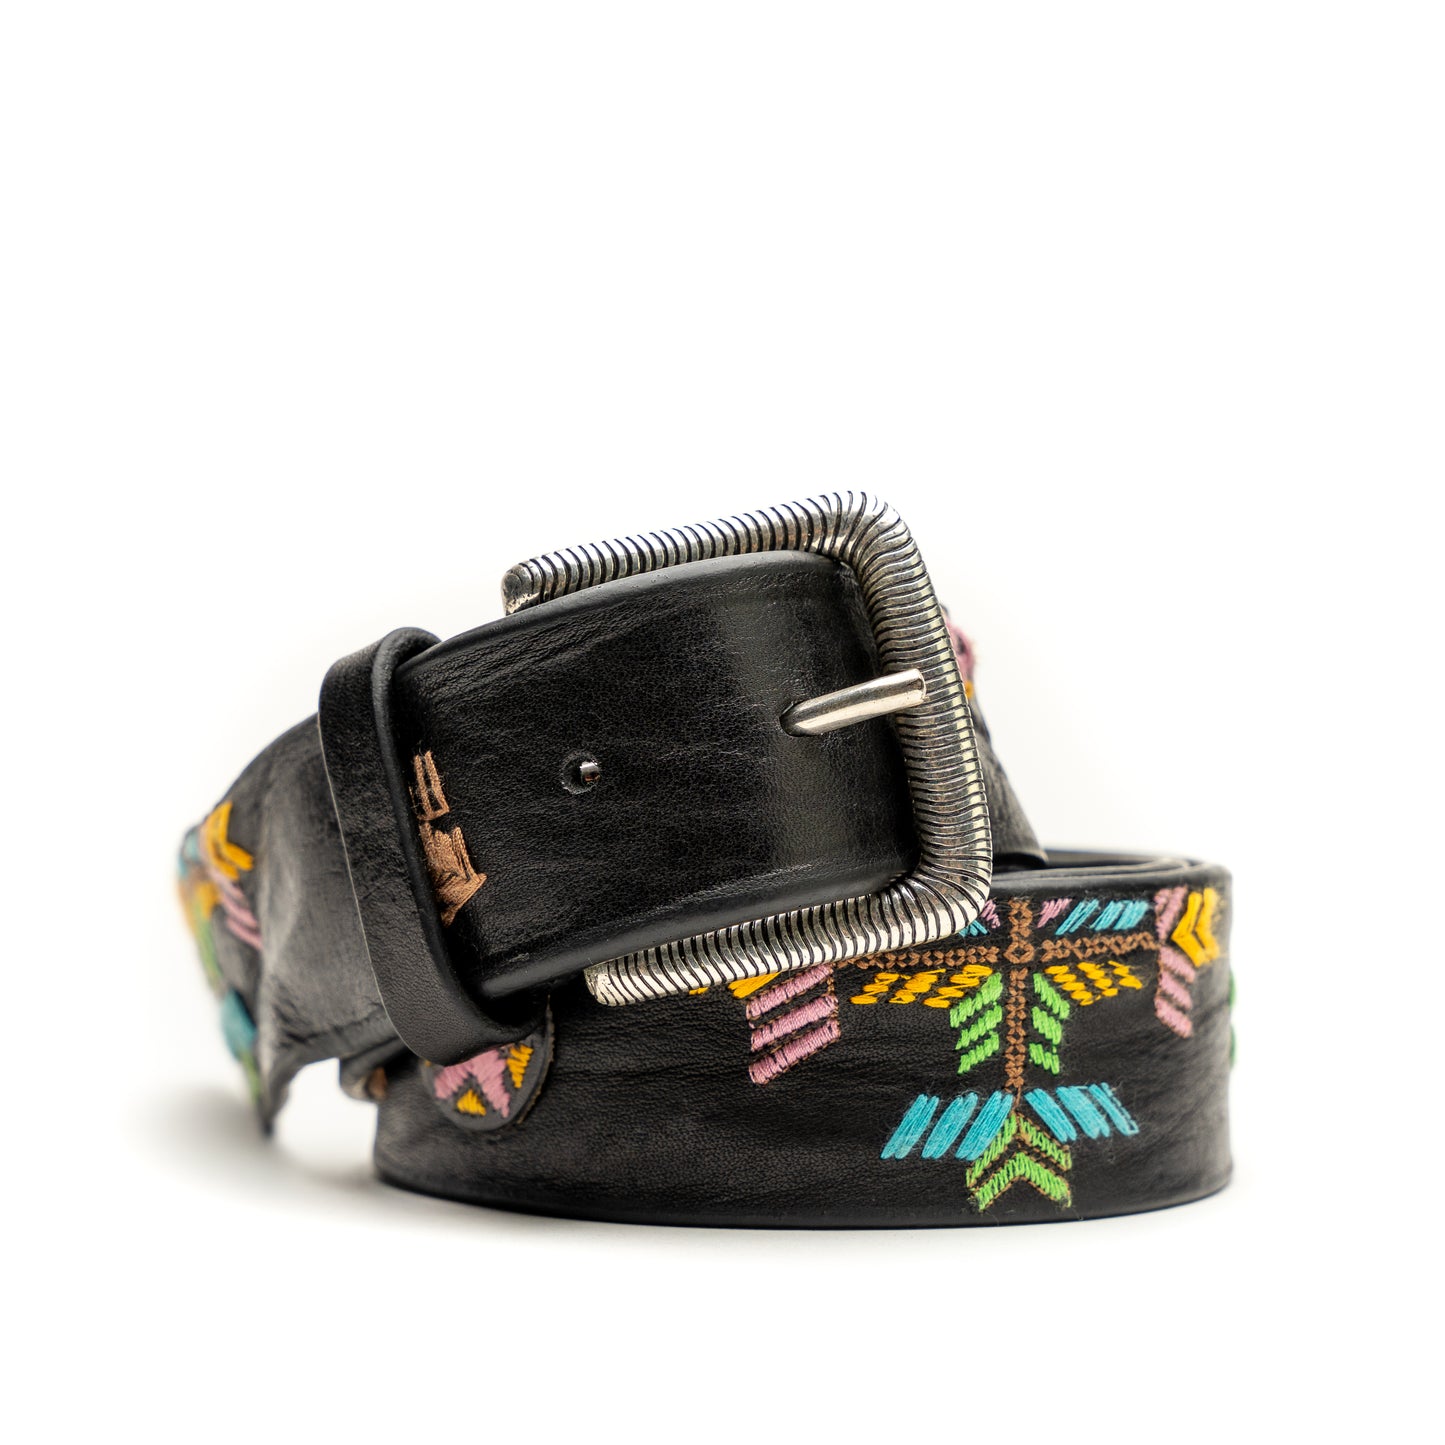 Vintage Black Leather Belt with Navajo Candy Embroidery